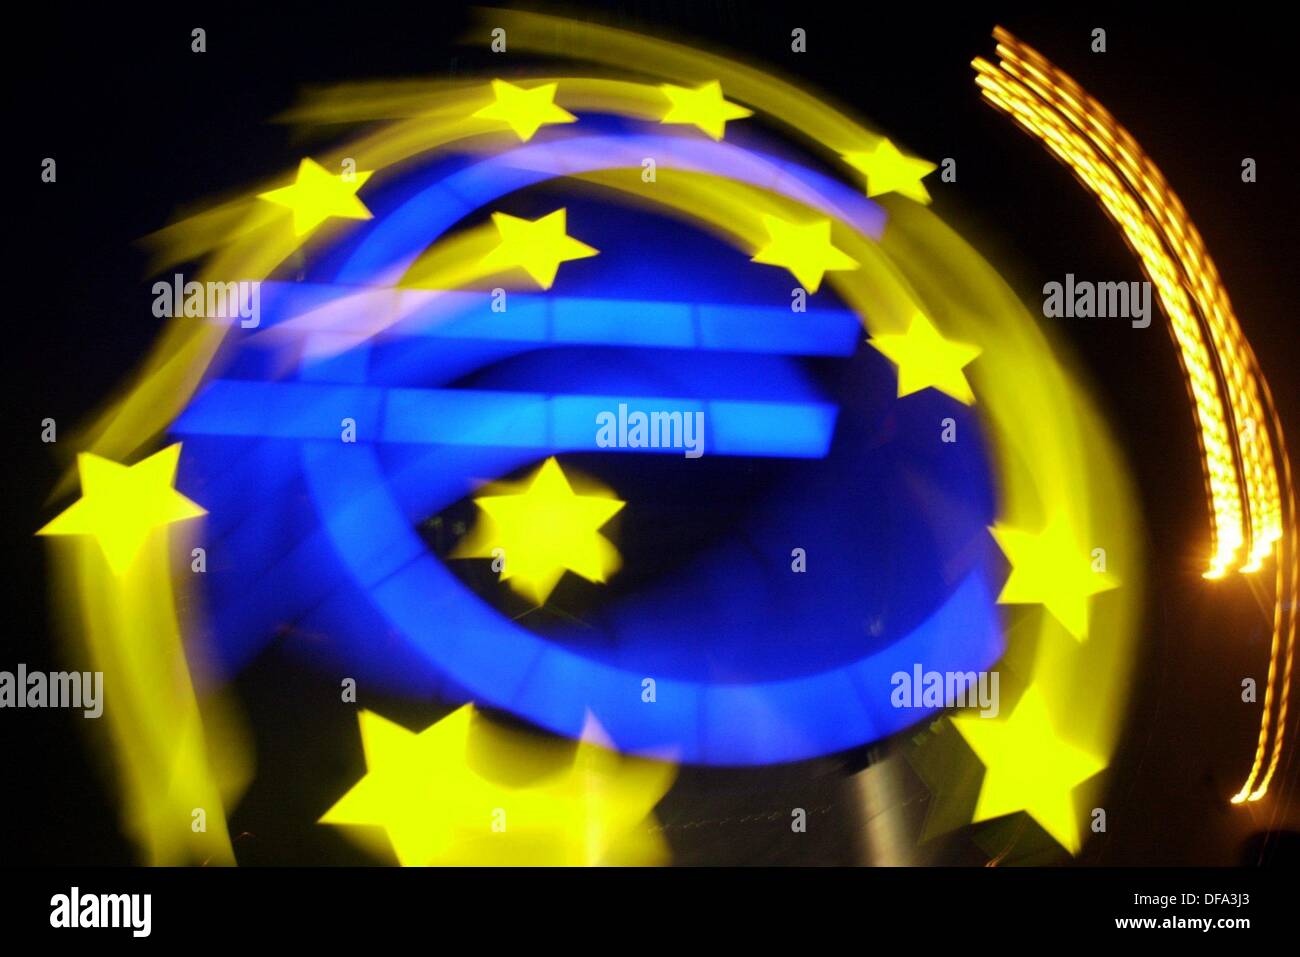 The Euro symbol is photographed with a turning effect in front of the European Central Bank in Frankfurt, Germany, 28 December 2002. One year after the introduction of the euro notes, the majority of the Germans mourns after the D-mark referring to a survey of the EU Commission.       Keywords: Business, Economy Business and Finance, currency, money, euro, night view, illuminated, stars Stock Photo